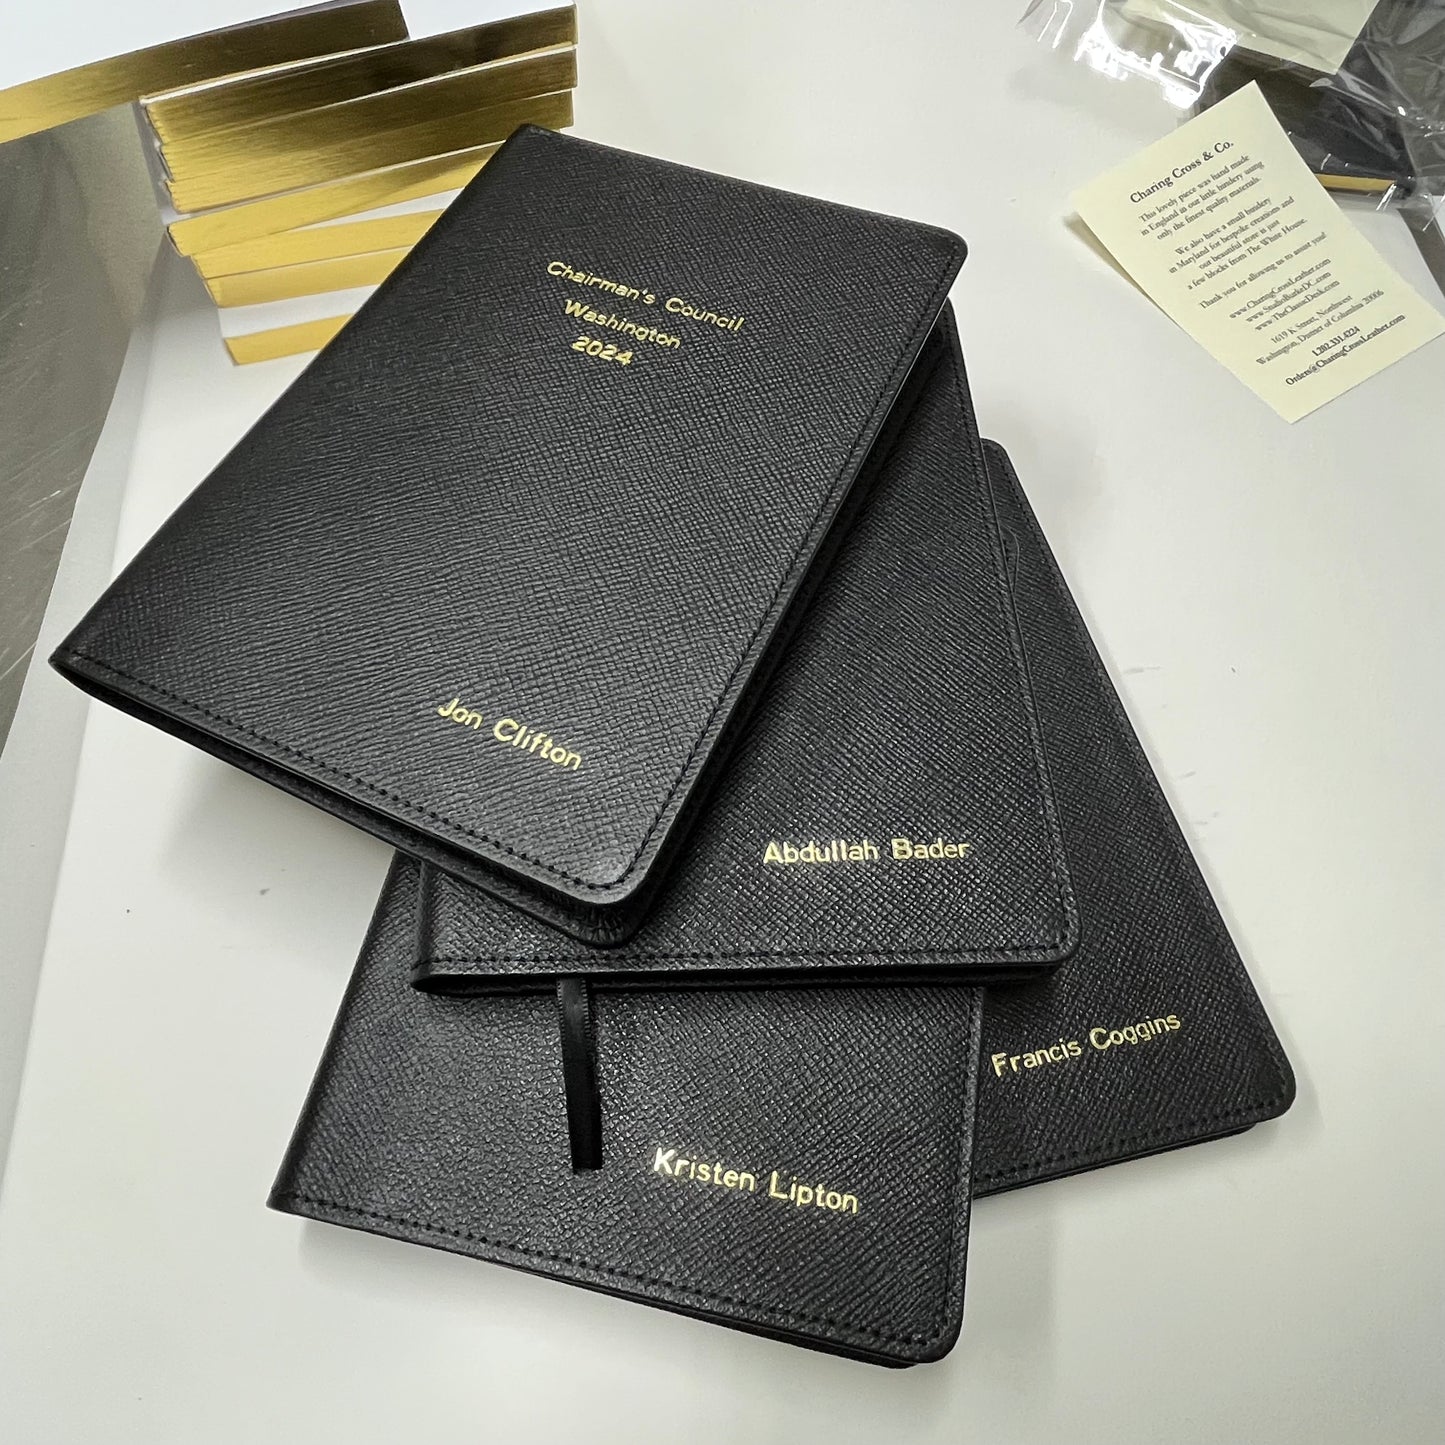 Gallup | Chairman's Council Washington 2024 | Custom Journal Book with Gold Stamping